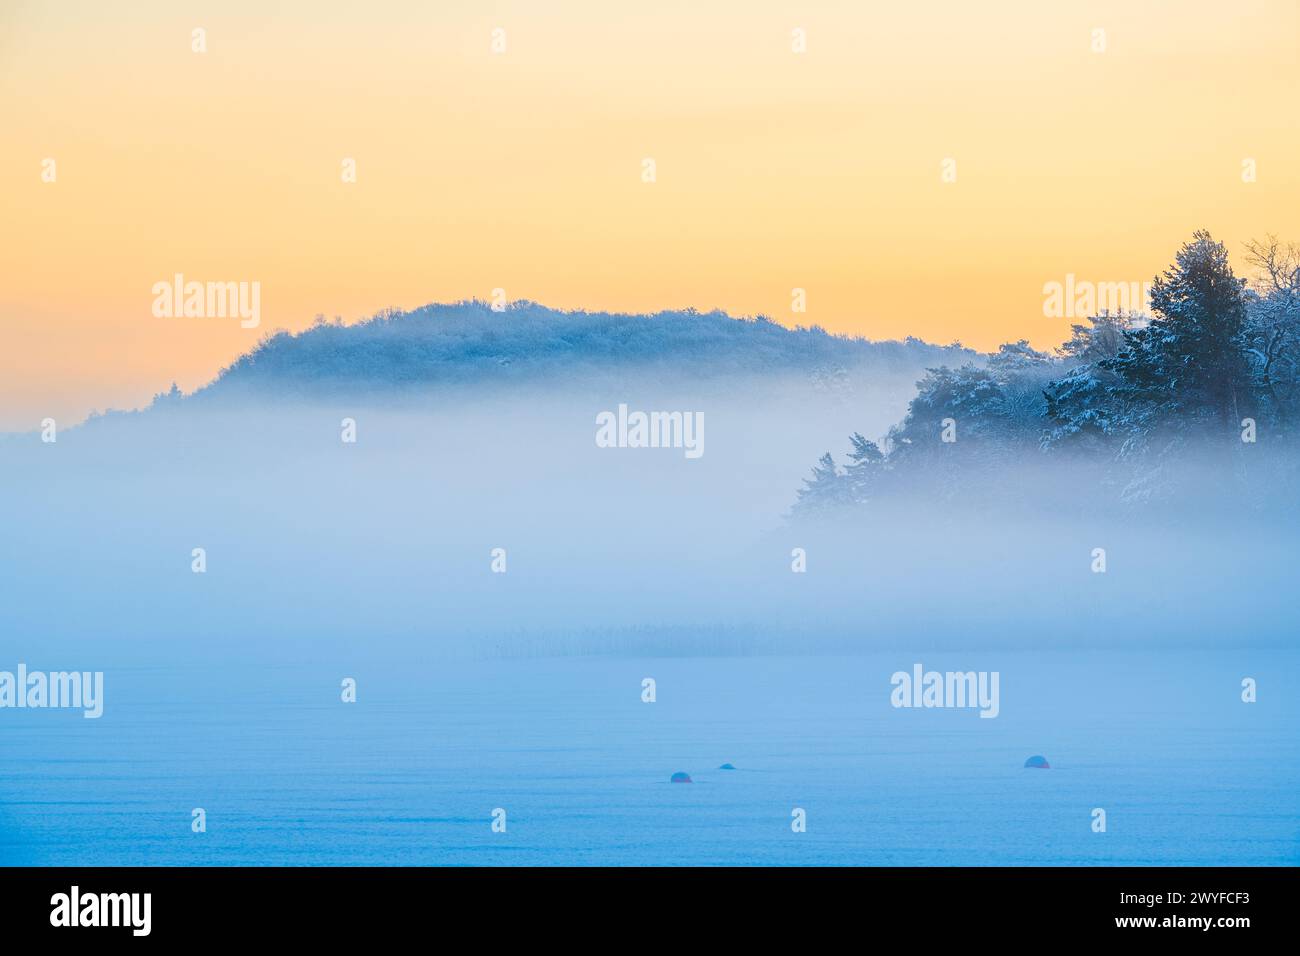 A mist-covered lake reflecting the early morning light, with trees lining the shore and disappearing into the foggy distance. The serene scene is shro Stock Photo